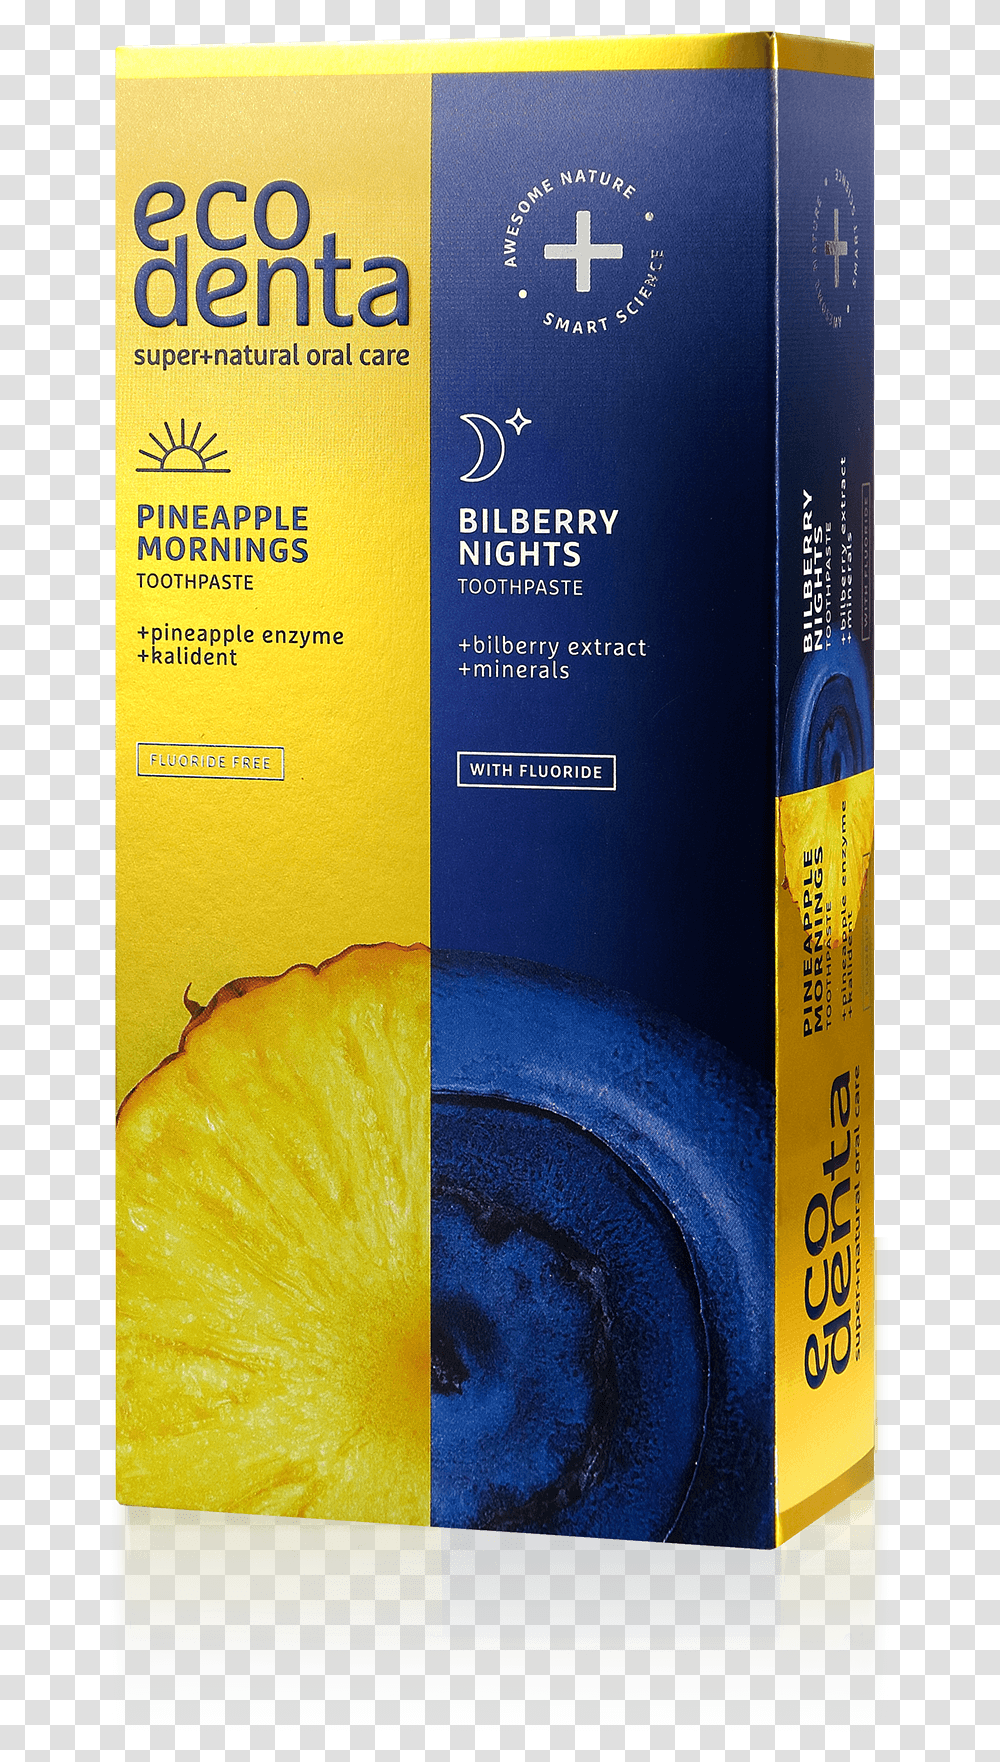 Ecodenta Pineapple Mornings And Bilberry Nights Toothpastes Toothpaste, Book, Plant, Bottle, Label Transparent Png